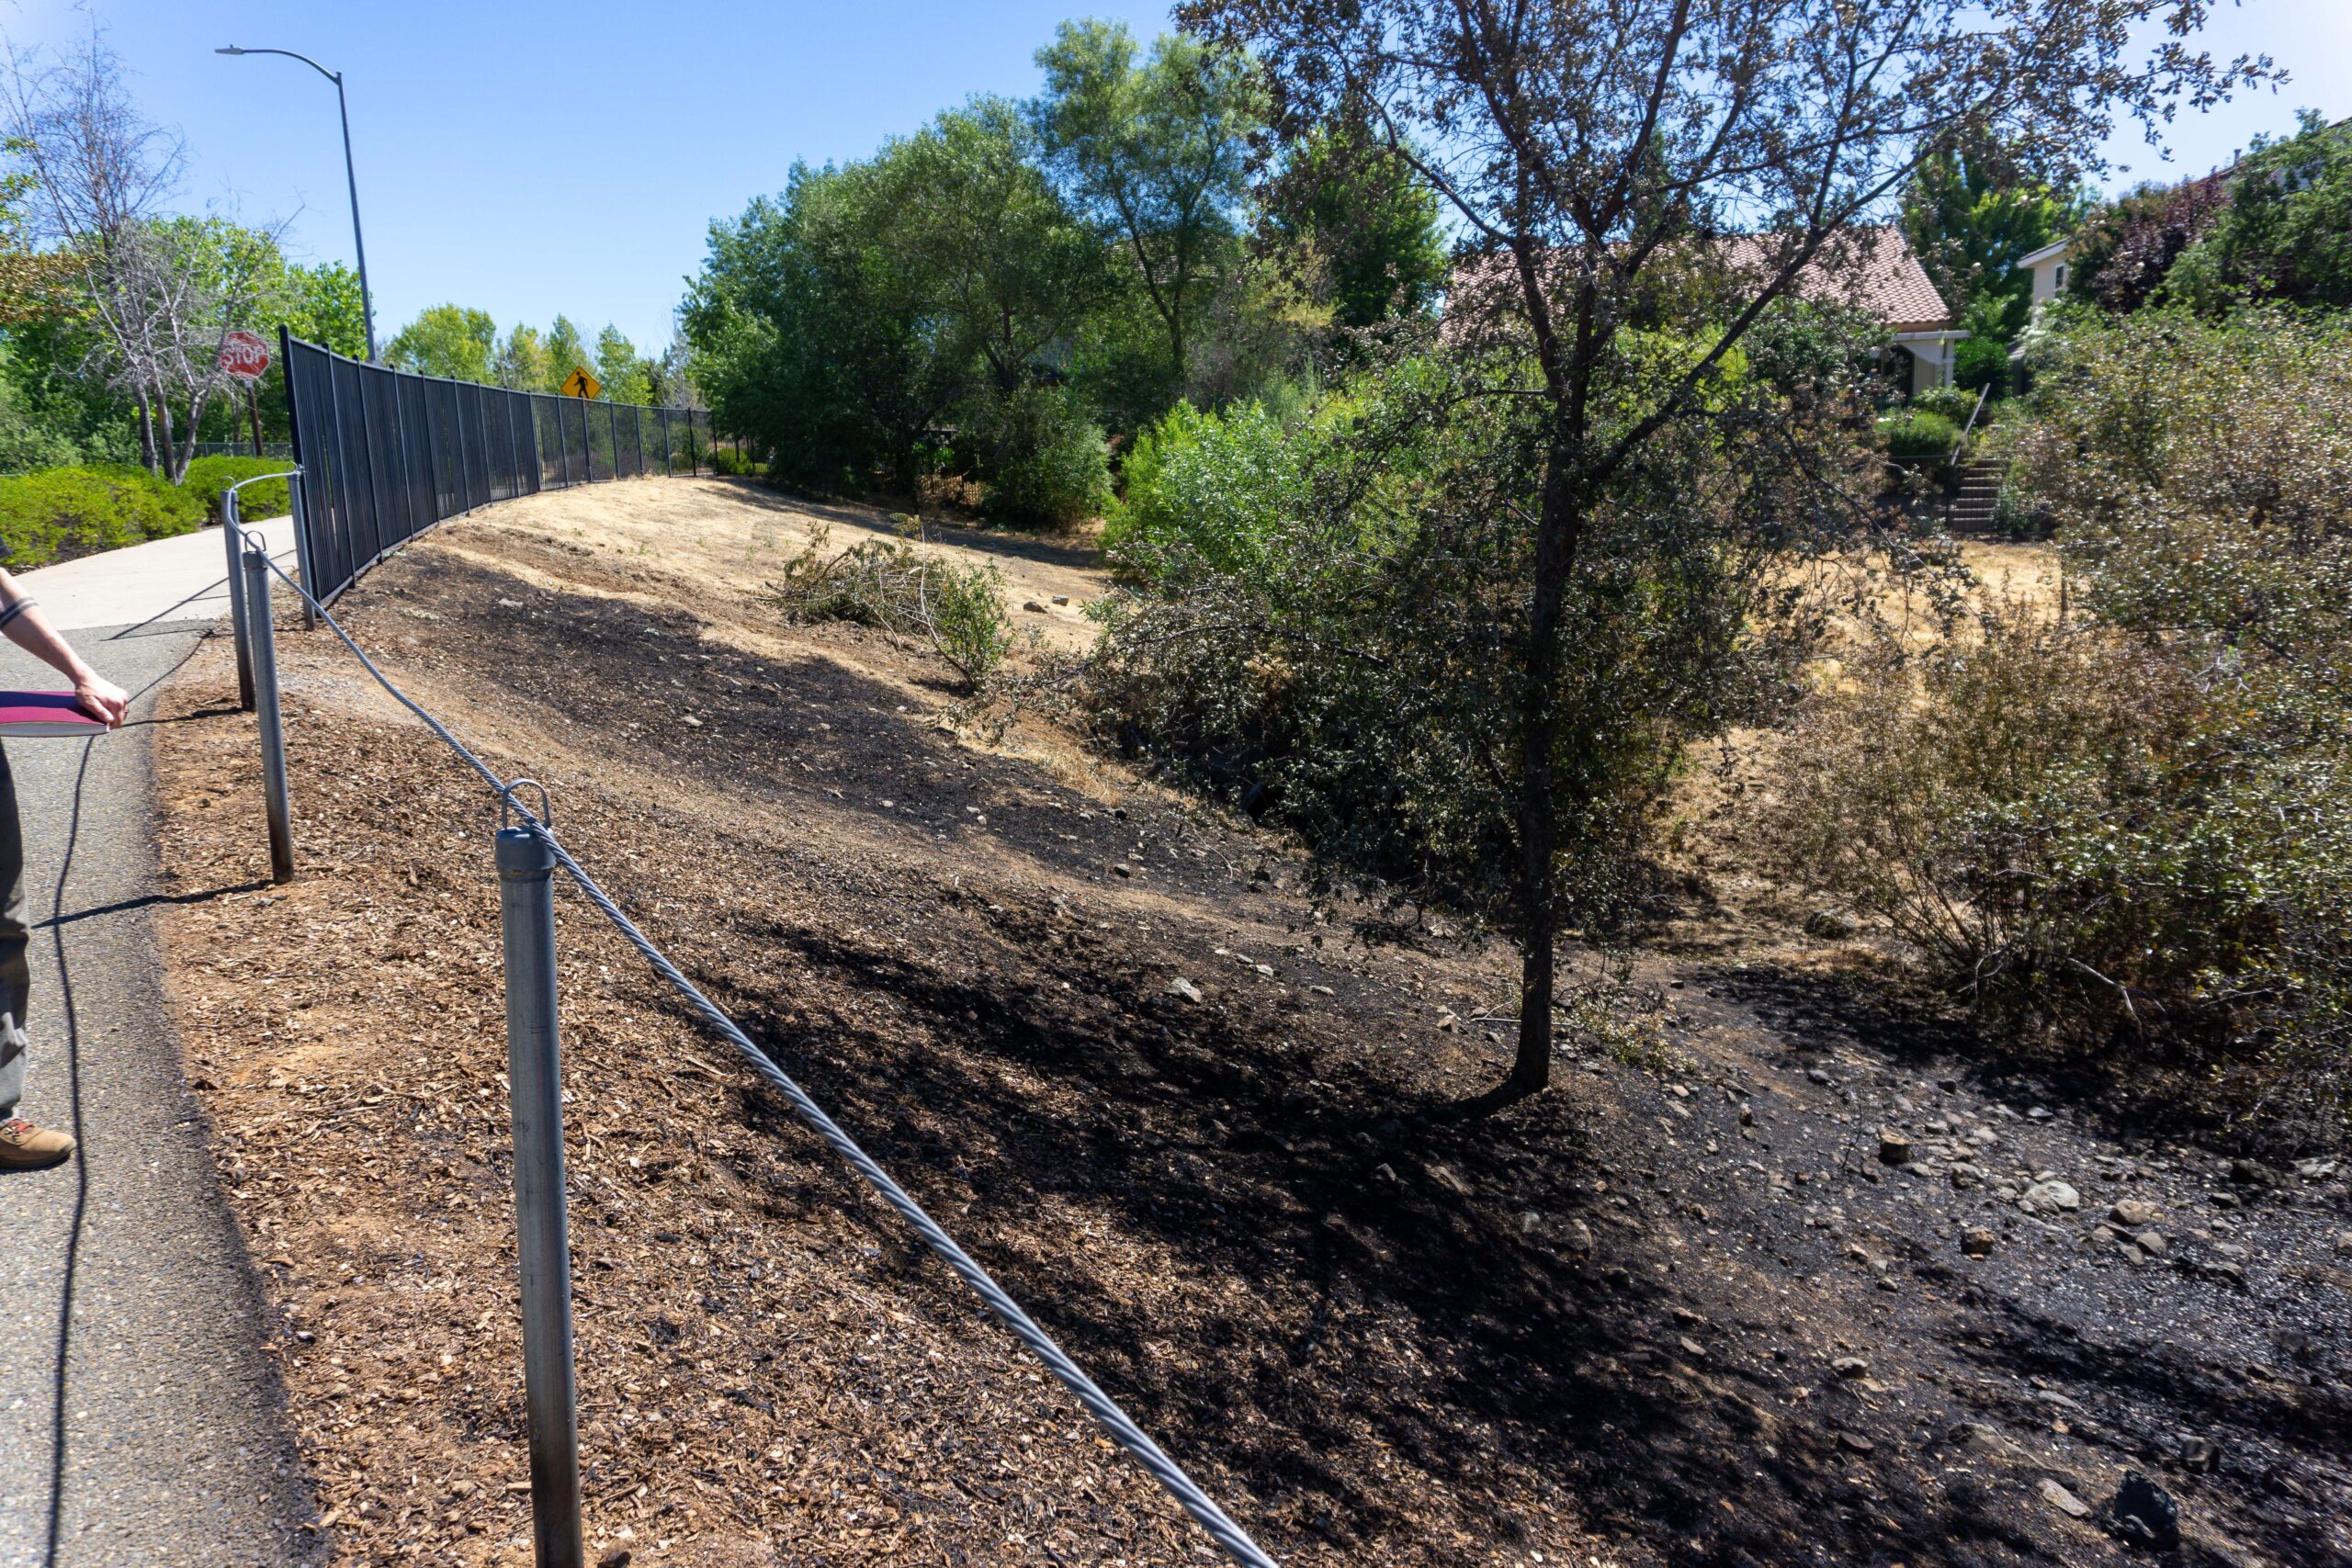 View of black charred remains of low temperature vegetation fire in a nature preserve.